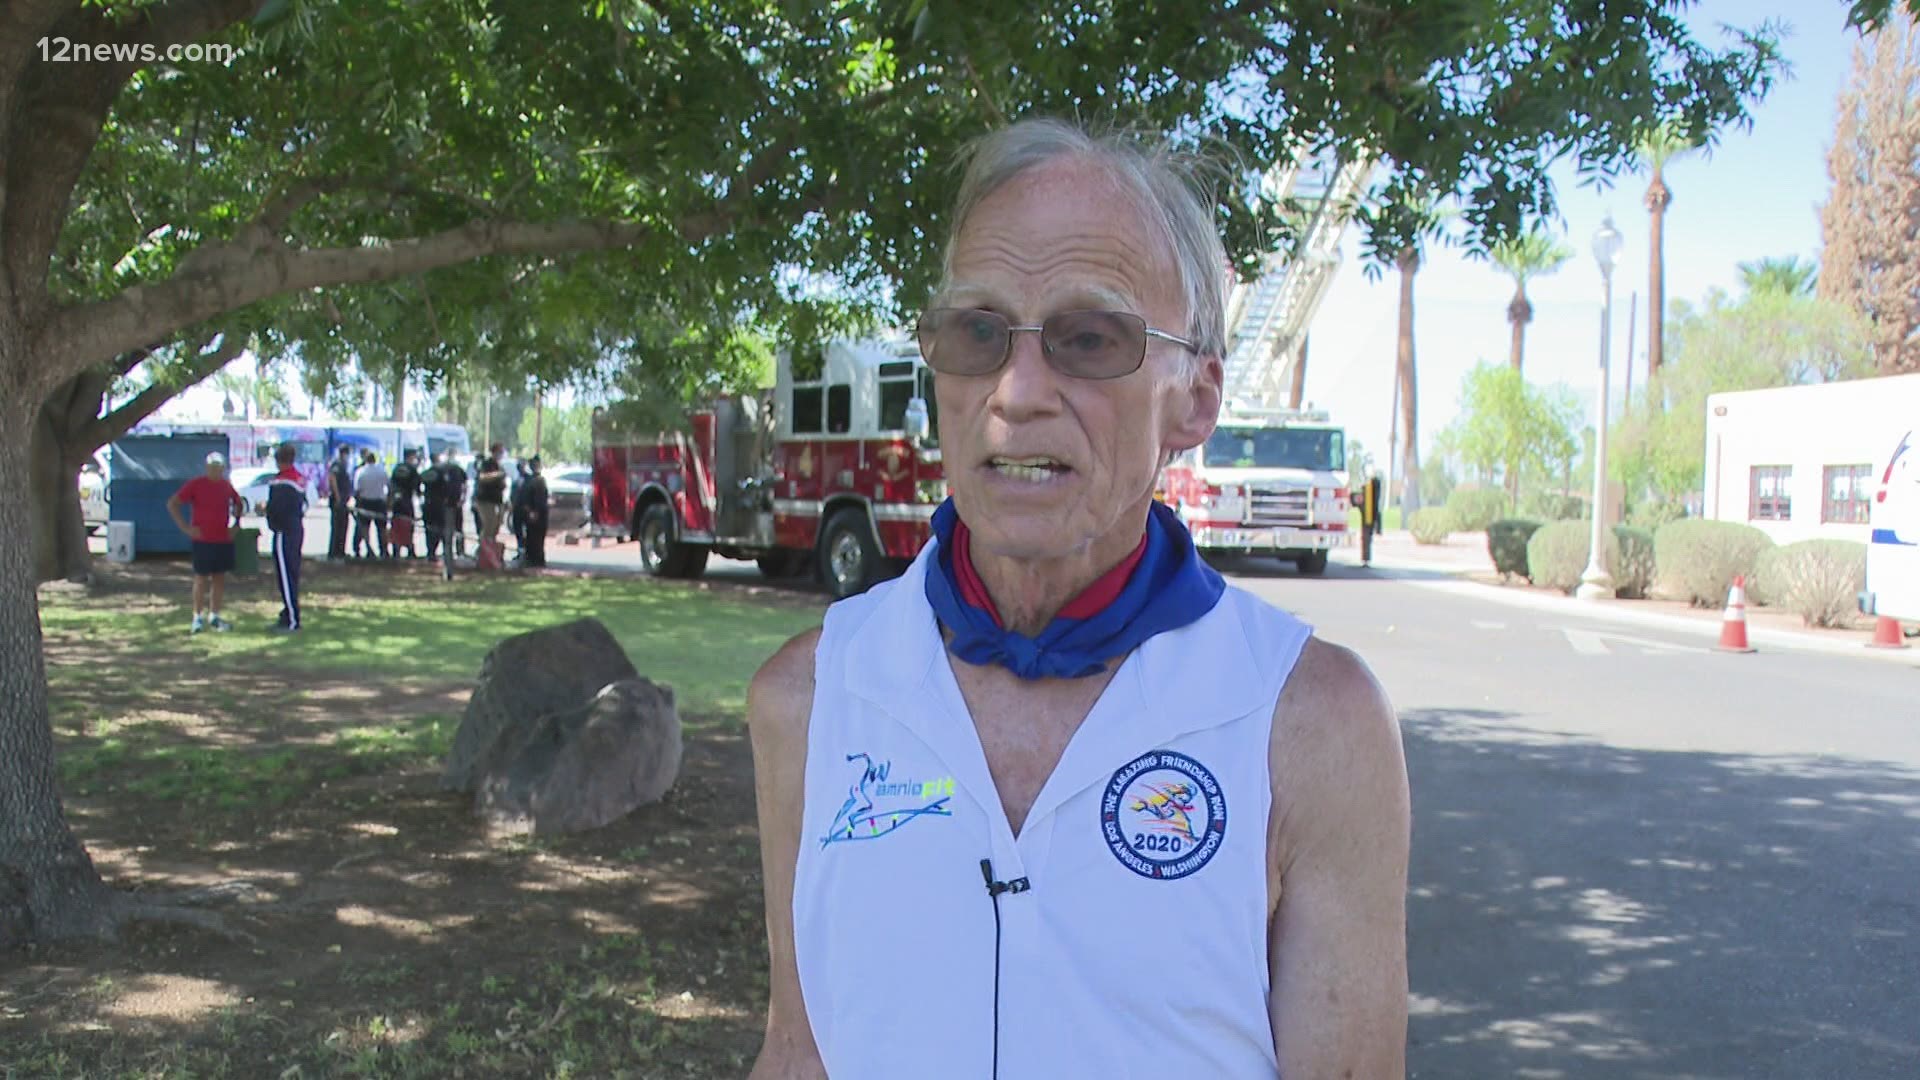 78-year-old Stan Cottrell is a Guinness World Records holder for distance running. He was the inspiration for Forrest Gump's cross-country run in "Forrest Gump."